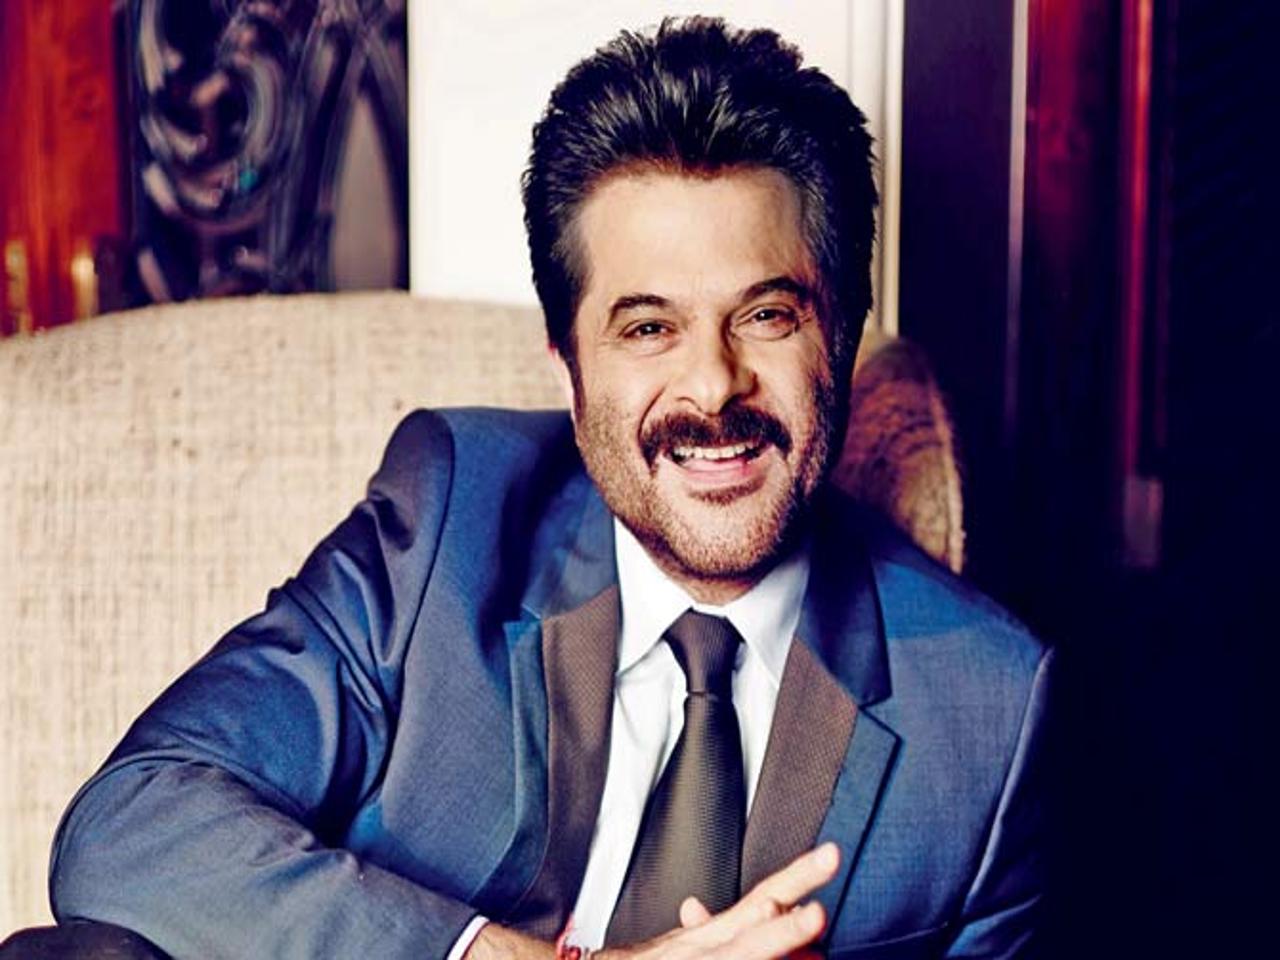 Anil Kapoor Biography, Biodata, Wiki, Age, Height, Weight, Affairs & More